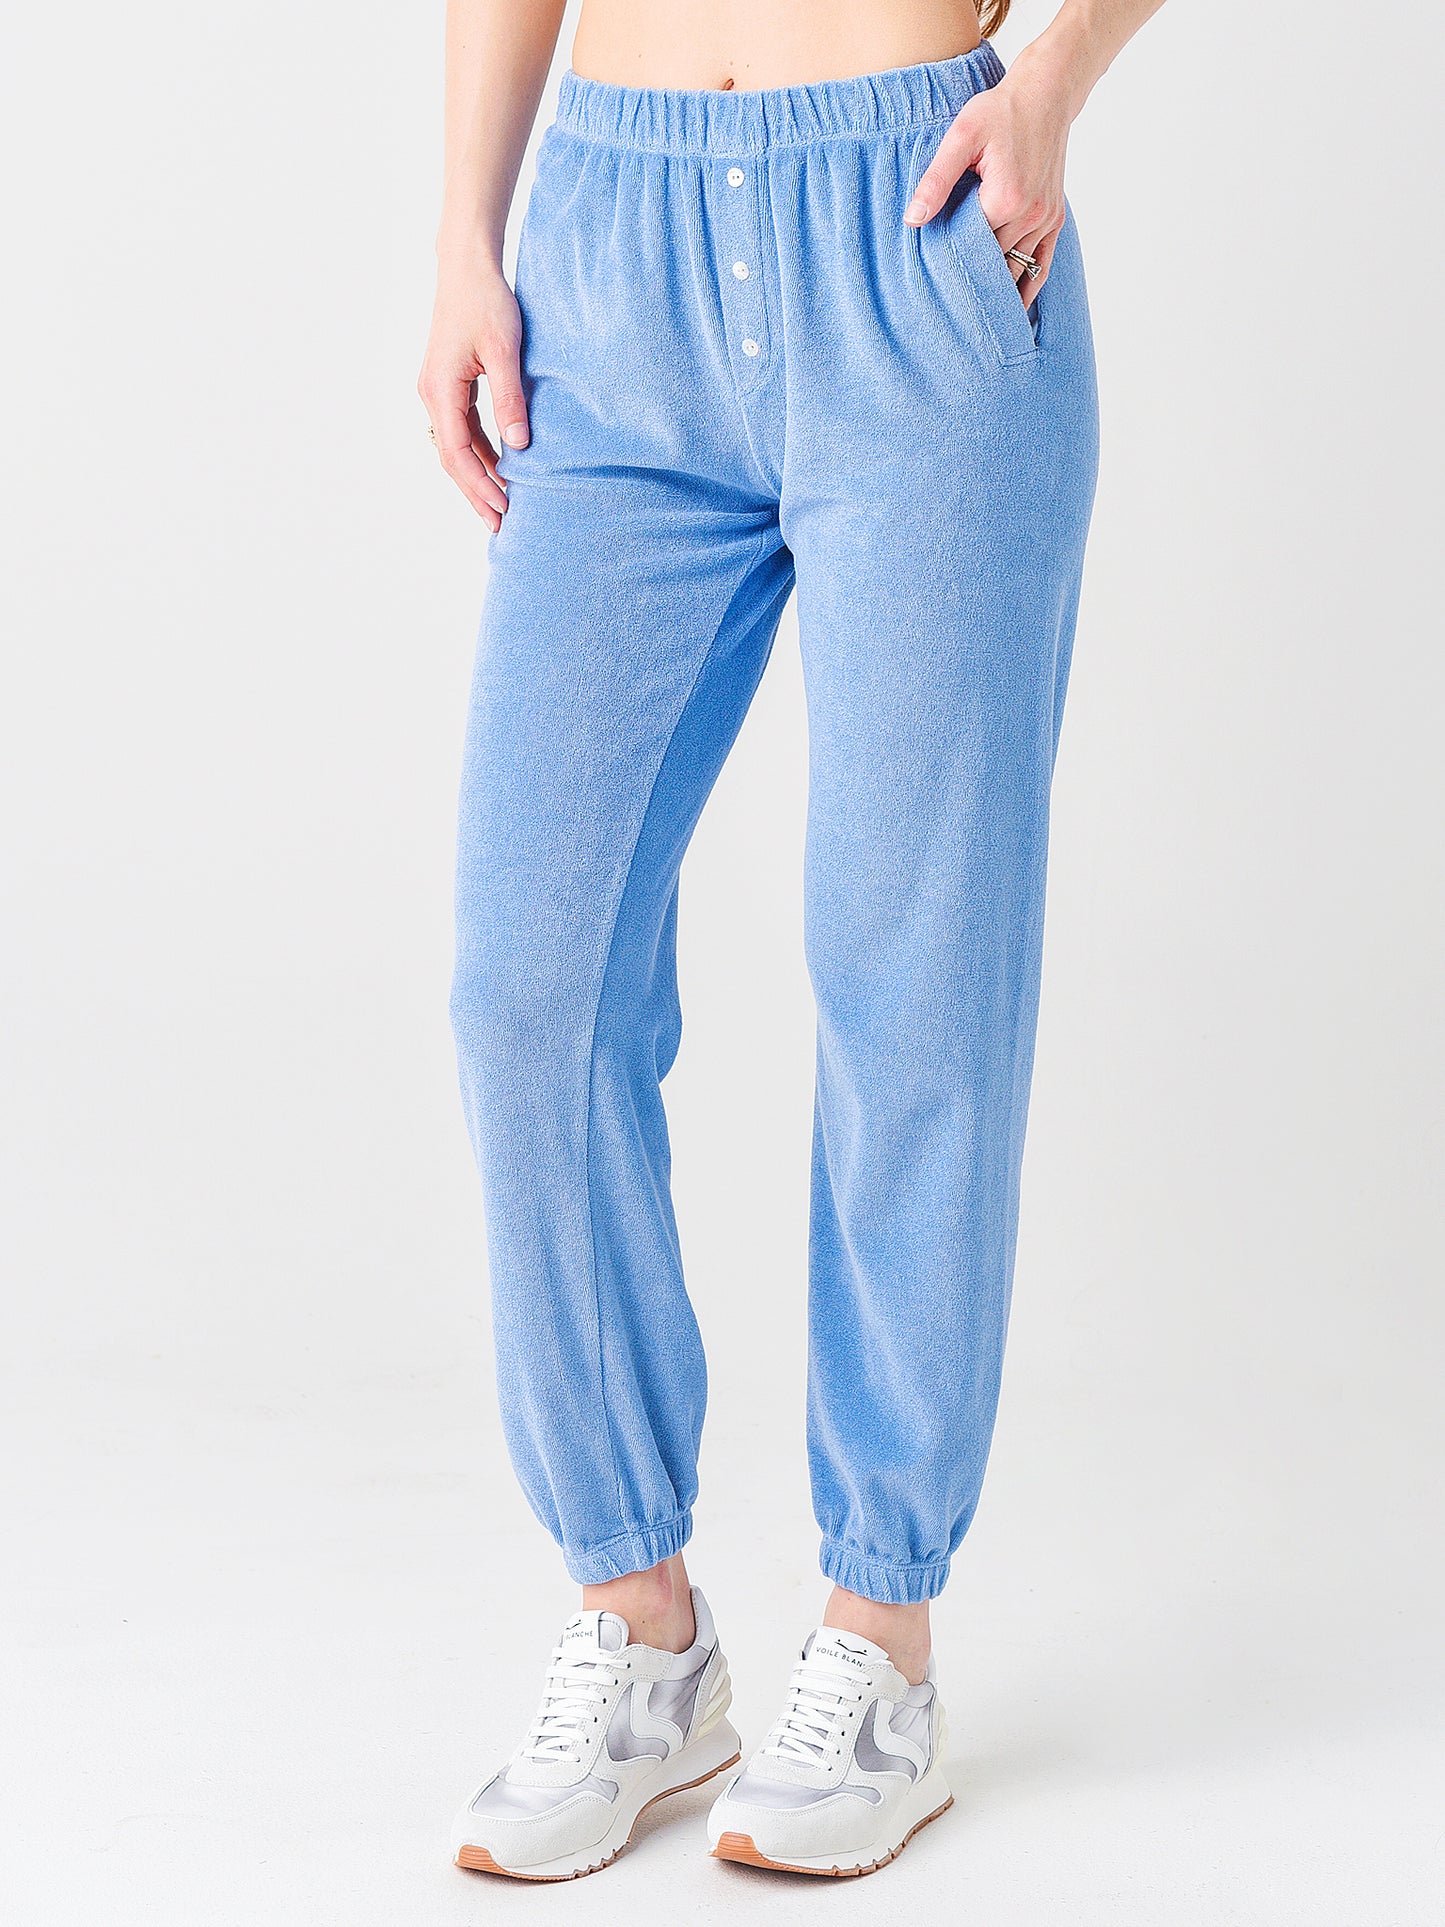 DONNI. Women's The Terry Henley Sweatpant